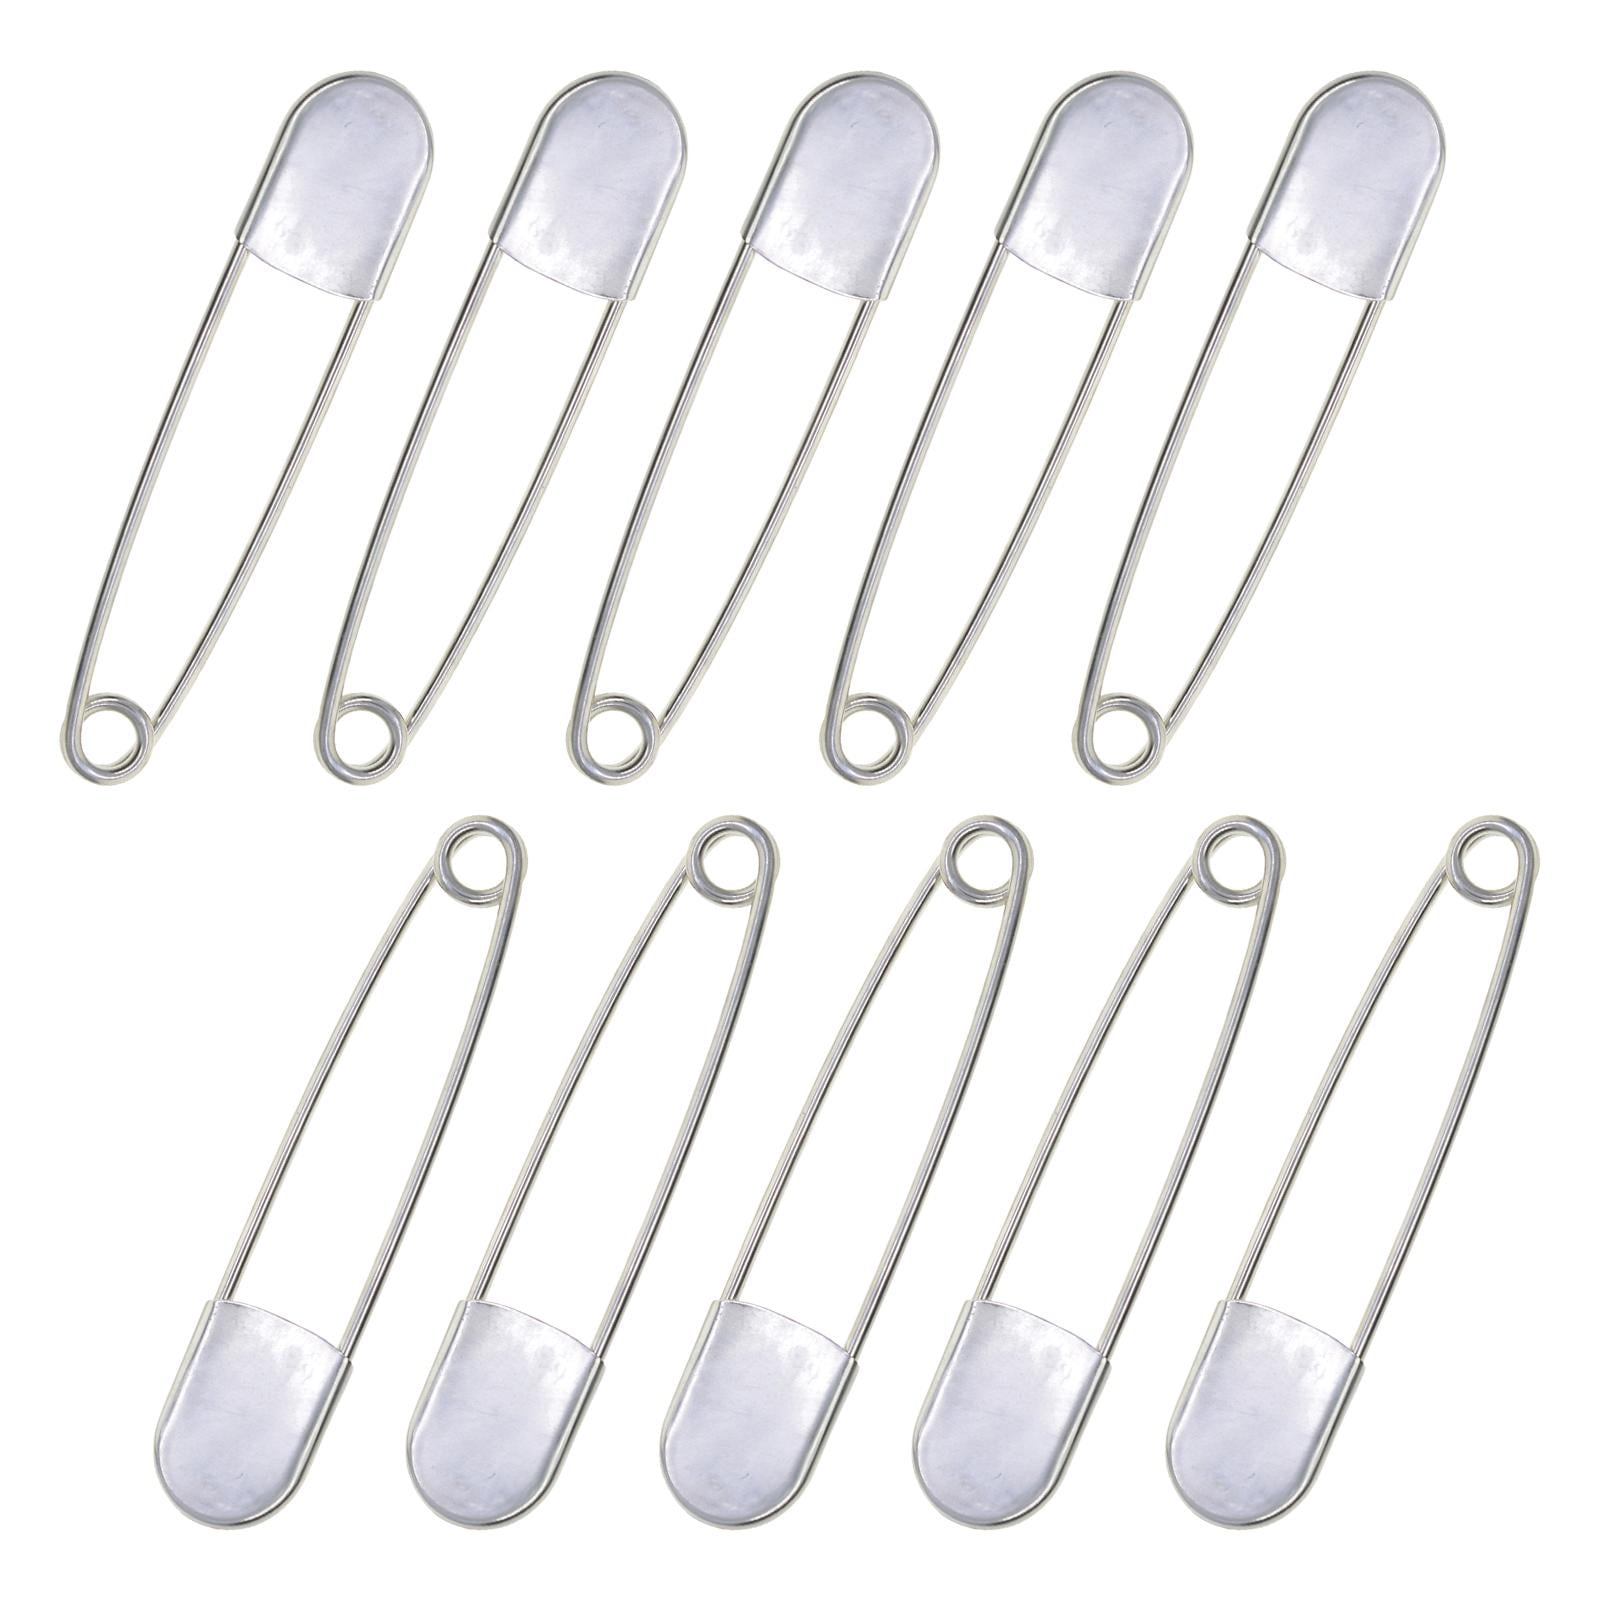 Safety Pins 2.95 Inch Large Metal Sewing Pins for Office Home Silver Tone  15Pcs